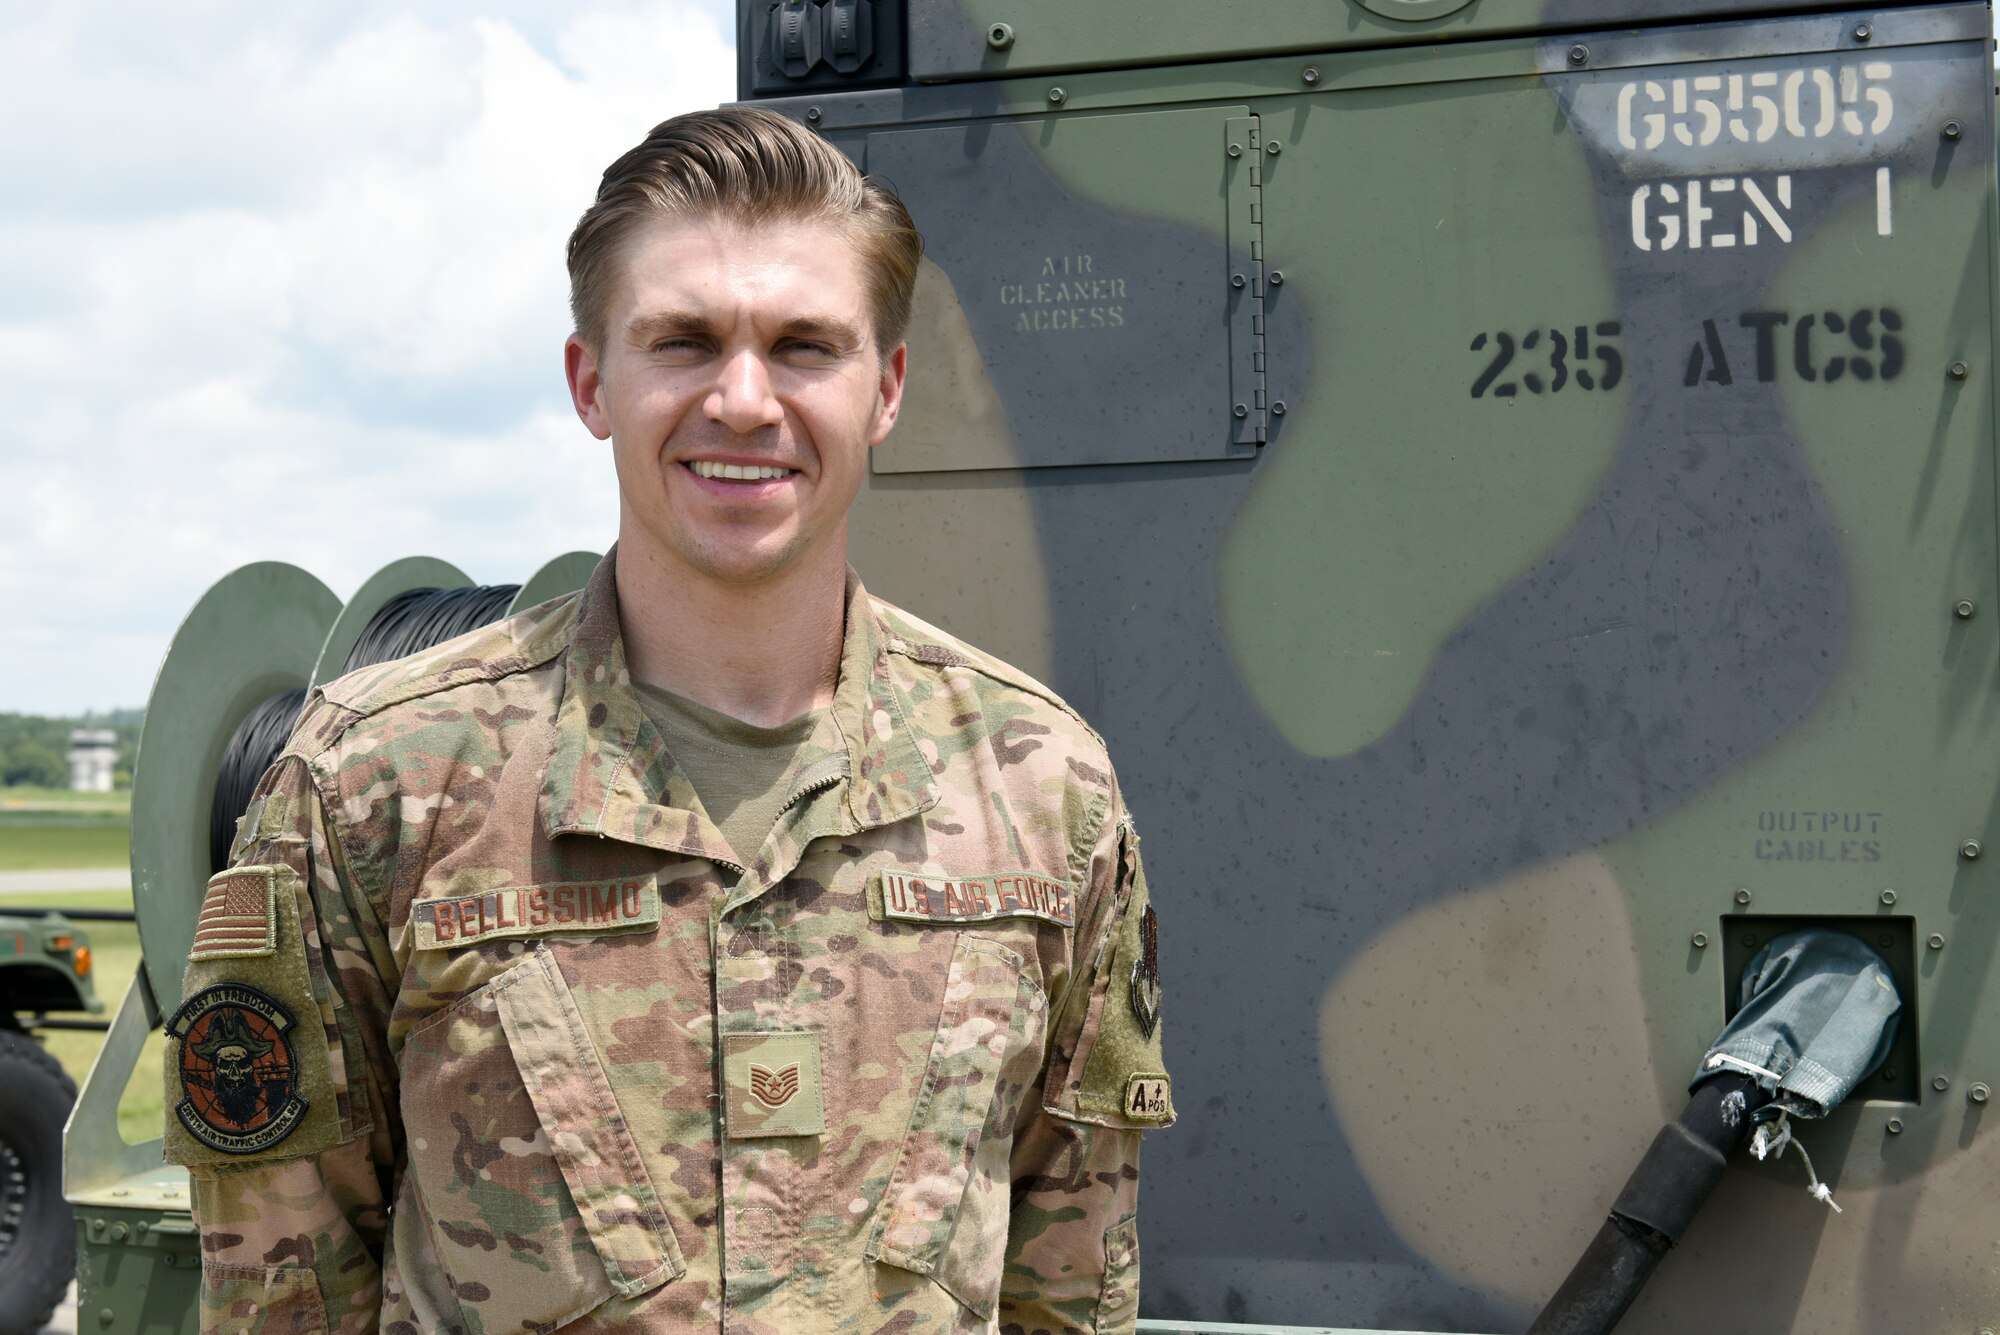 U.S. Air Force Tech. Sgt. James Bellissimo, controller with the 235th Air Traffic Controller Squadron, poses in front of a mobile radar unit set in New London, N.C., Aug. 3rd, 2019. The North Carolina Air National Guard, along with New Hampshire and Maine Air National Guard, flew to Ramstein Air Base, Germany to work with active duty 1st Combat Communications Squadron. The Air National Guard units assisted in training the active duty unit with set-up, use, and tear-down of a mobile tower and deployable tactical air navigation system.